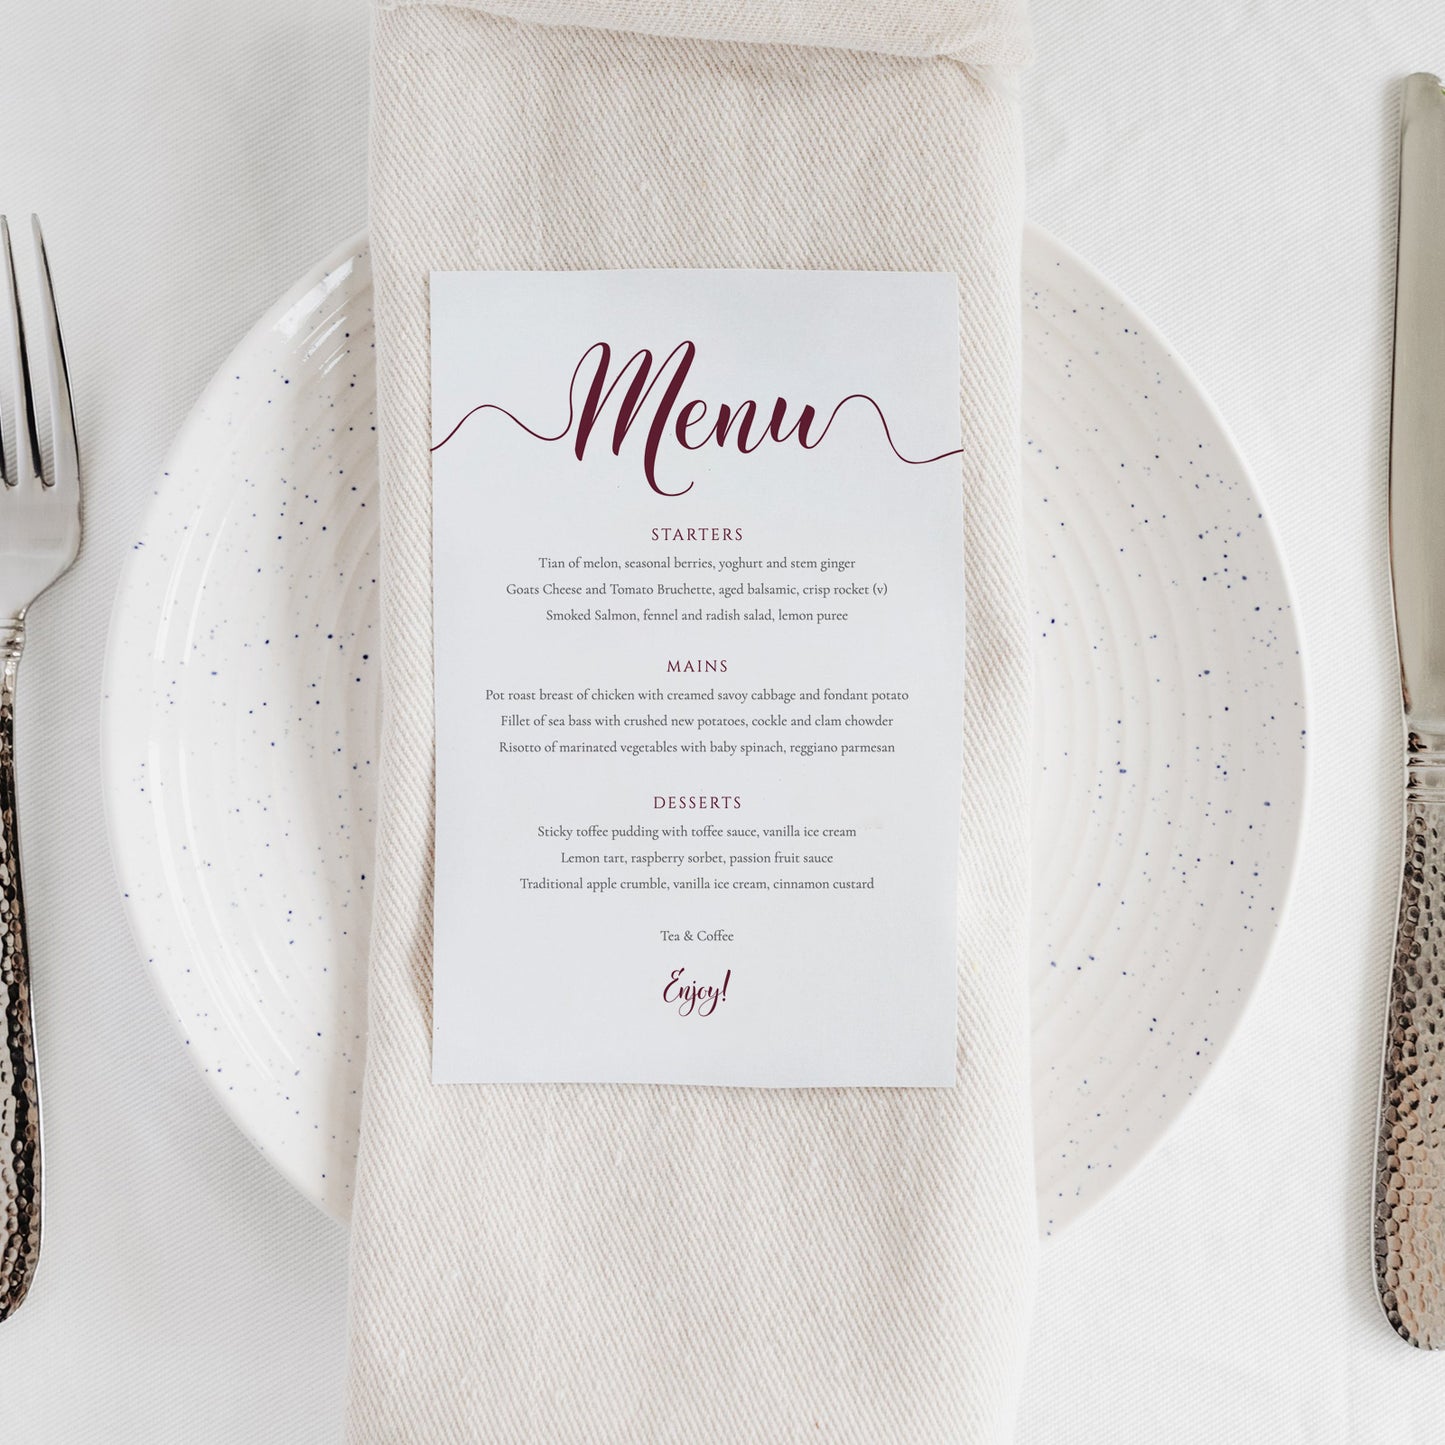 deep red menu card on plate at a wedding